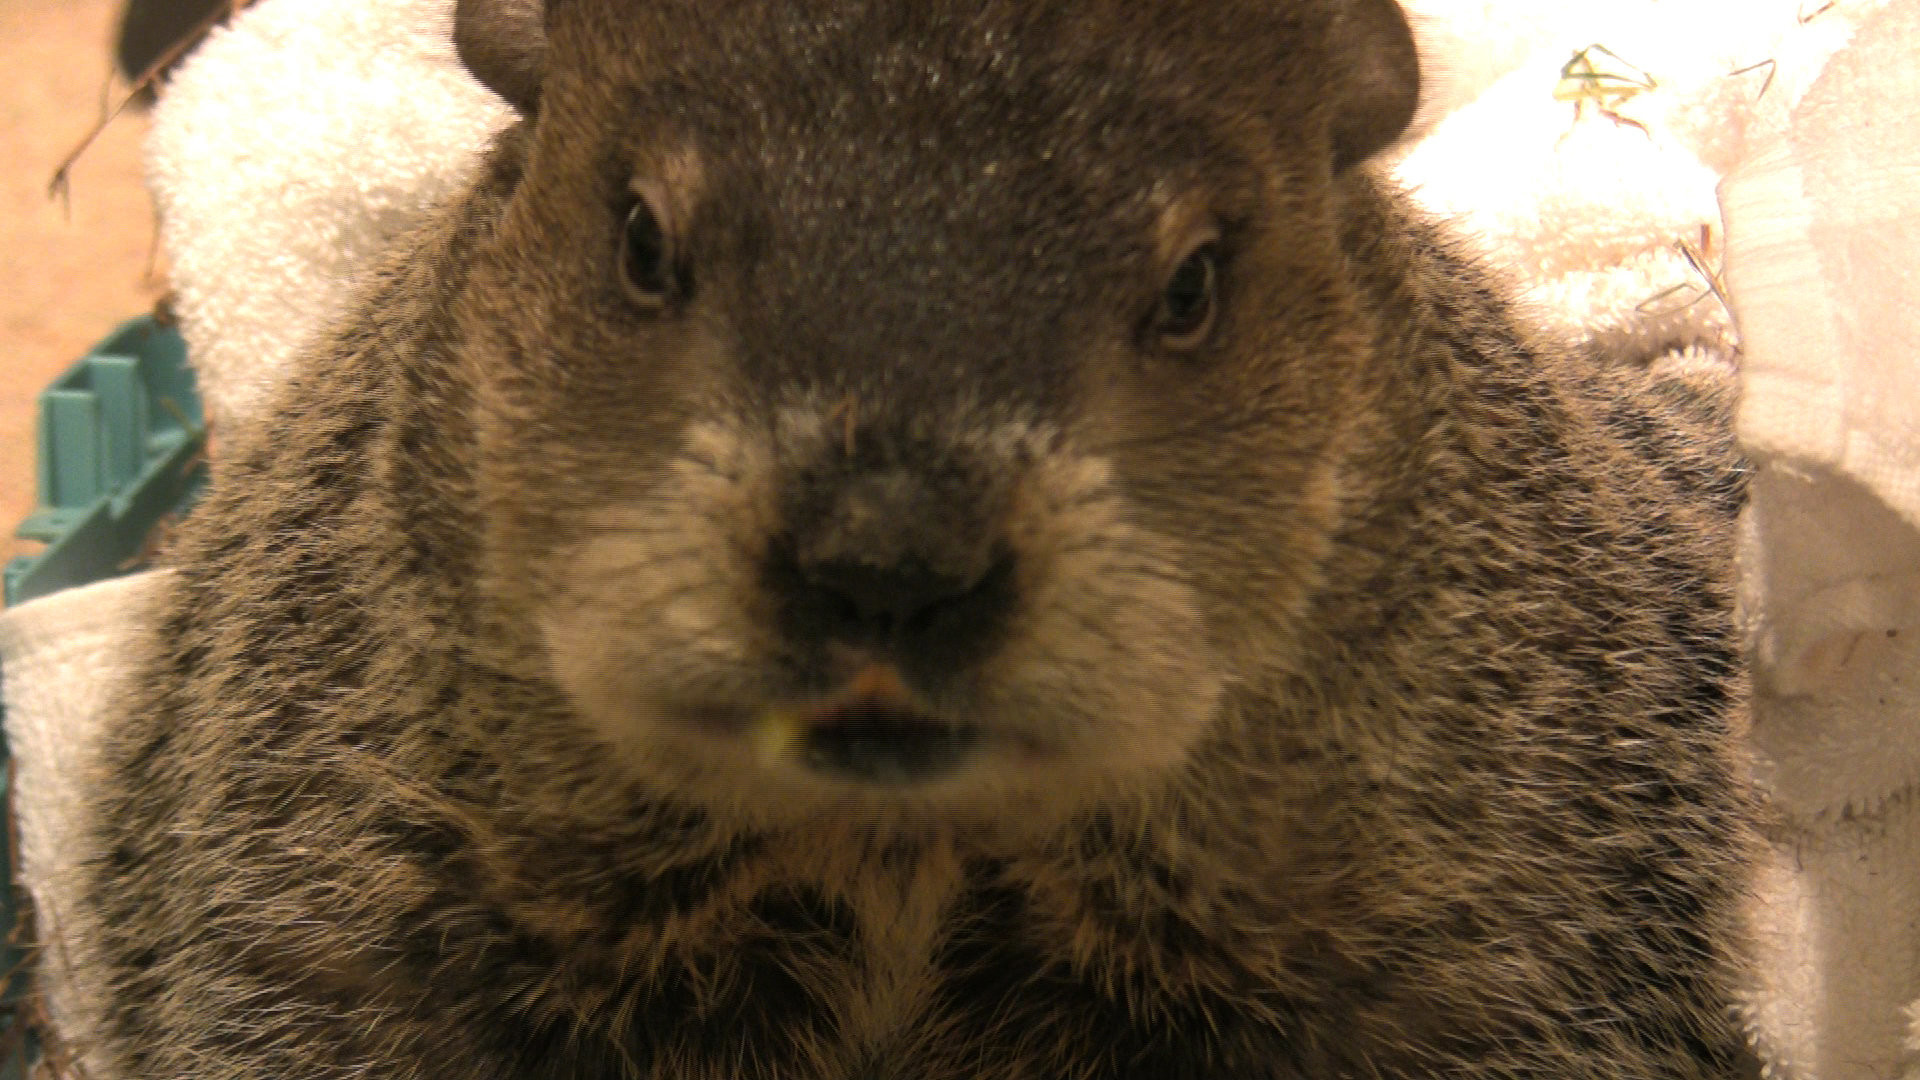 1920x1080 Groundhog Day 2011: Will Staten Island Chuck see his shadow? | SILive.com